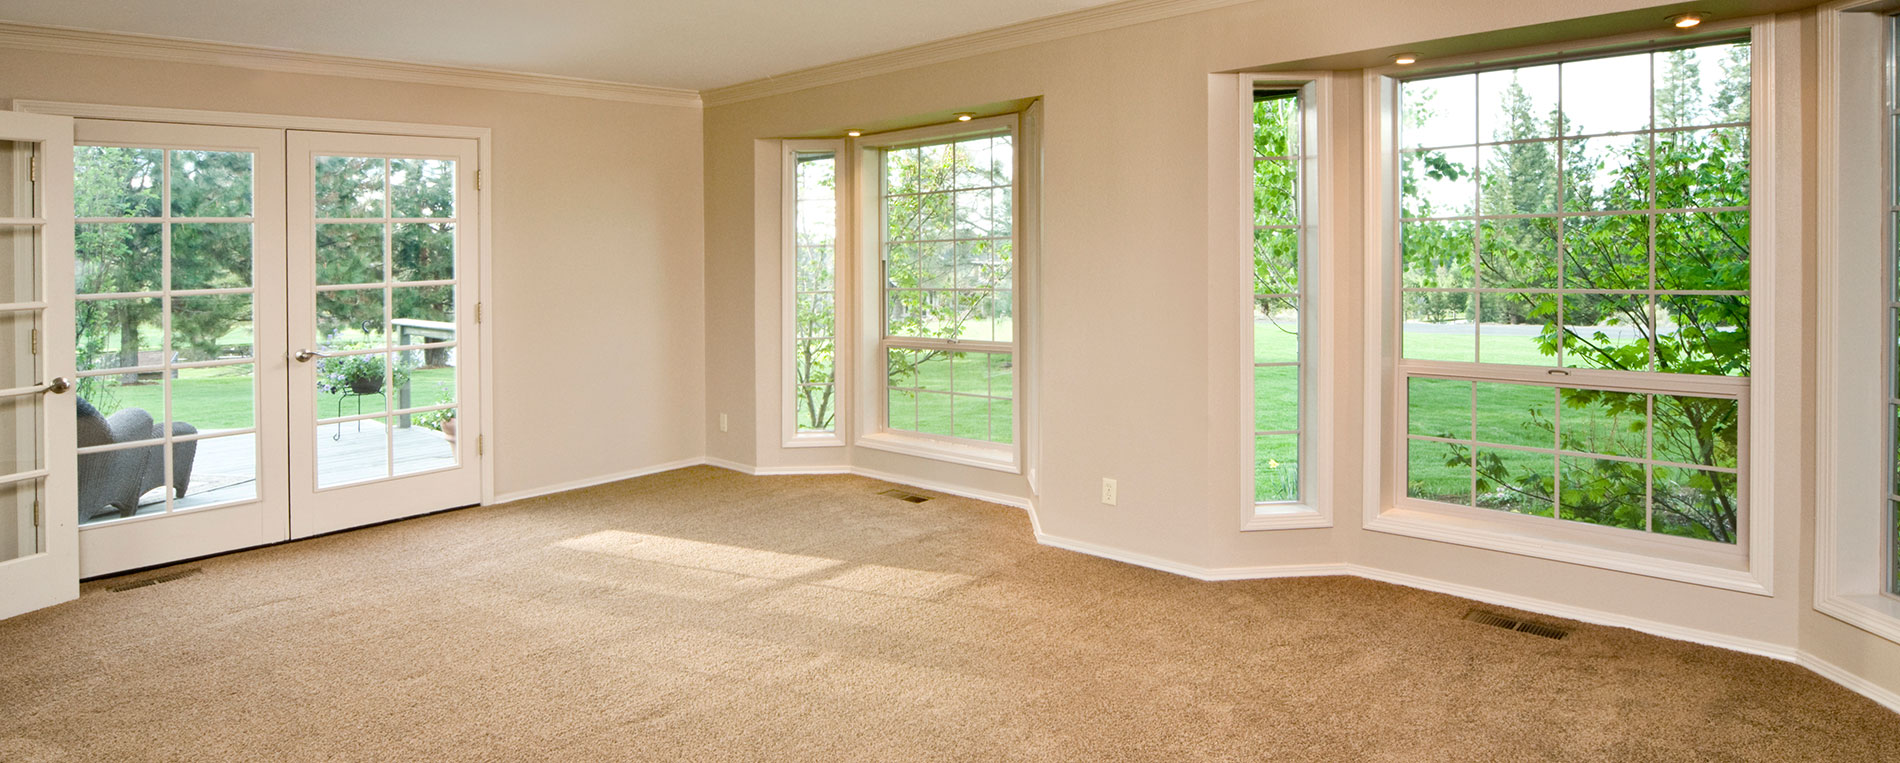 Low Cost Rug Cleaning In Brigden Ranch